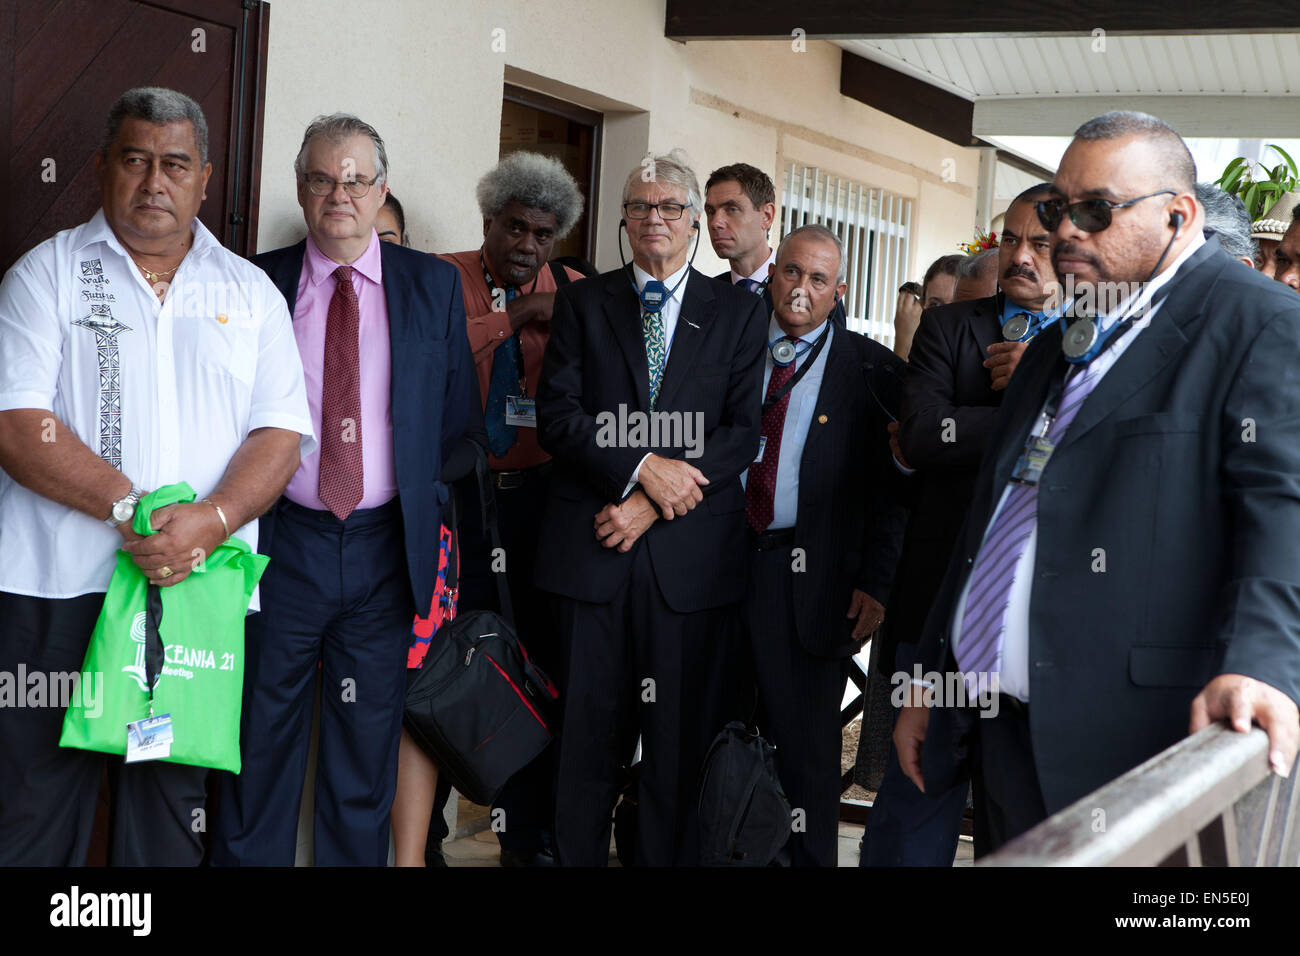 Noumea, New Caledonia. 28th April, 2015. Oceania 21, Meetings, third edition of the Oceanian summit on sustainable development, representatives of 17 South Pacific countries, 28, 29 and 30 April, climate change, roundable in the wake of Cyclone PAM in the Pacific, traditional customs, Suve Sosefo, Wallis et Futuna, Marc Le Cherfy, Jean Pierre Nirua, Director of Operations GFLM, David Scheppard, Director General PROE, Sune Hjelmerv Gudnitz, Head of the Regional Office for the Pacific, United Nations, Office Coordination of Humanitarian Affaires, Michael Donoghue, Peter Funaki, Milton Dube, Memb Stock Photo